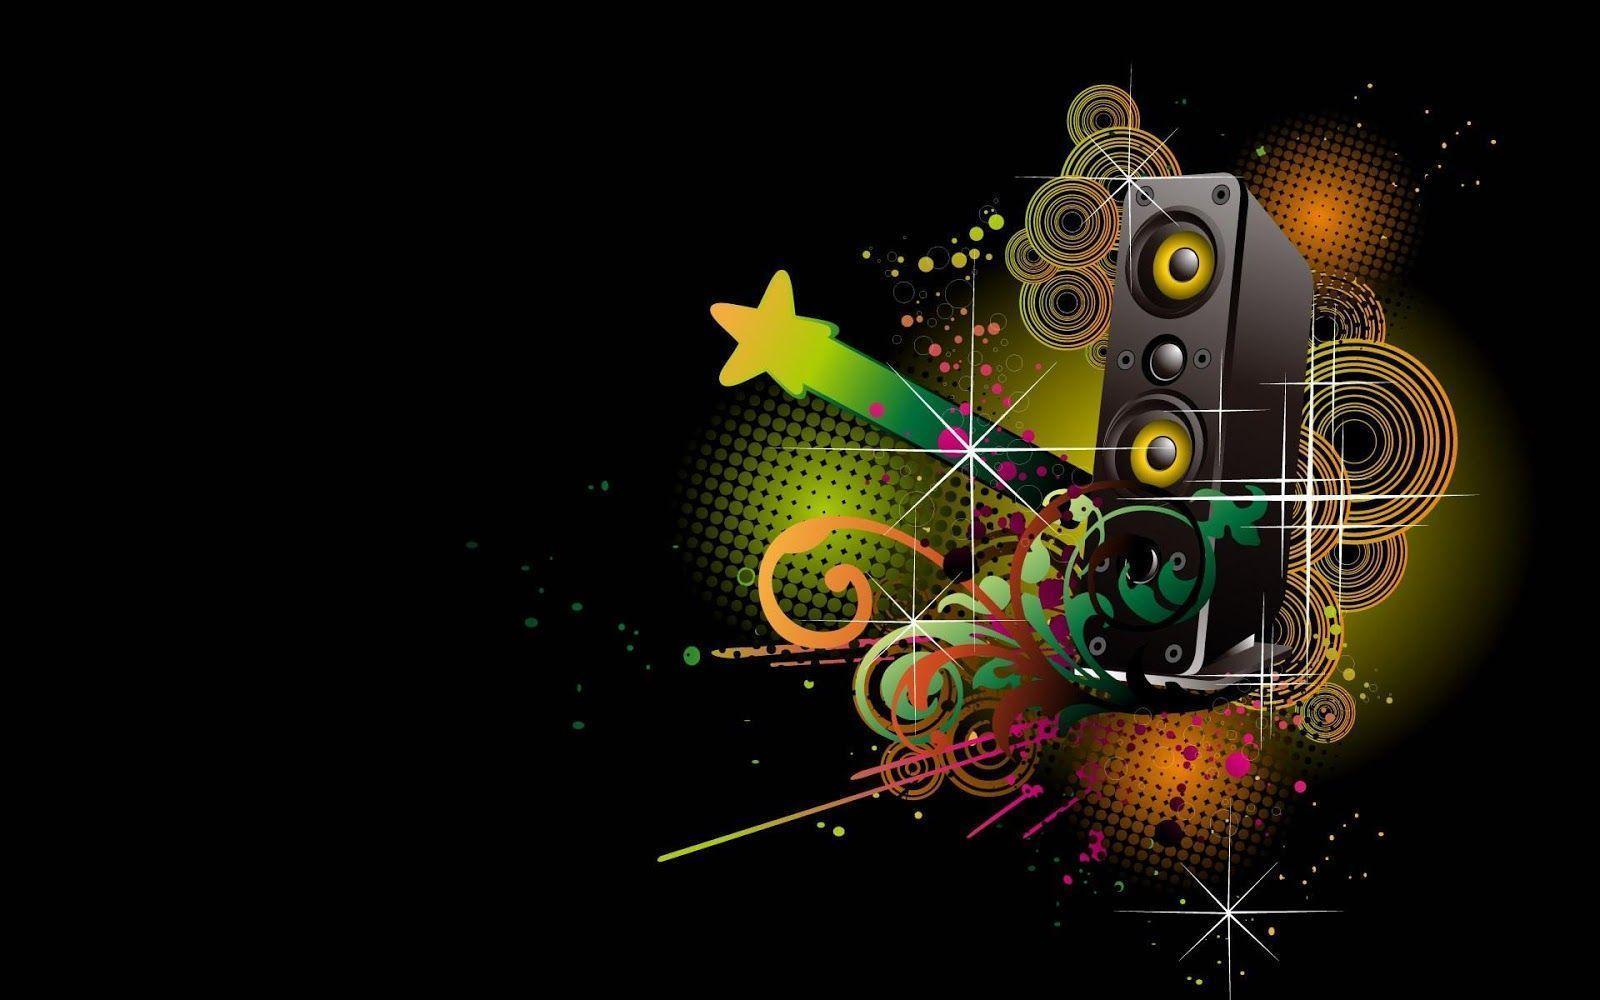 Cool HD Music Wallpaper Hq Background 15 HD Wallpaper. Hdimges